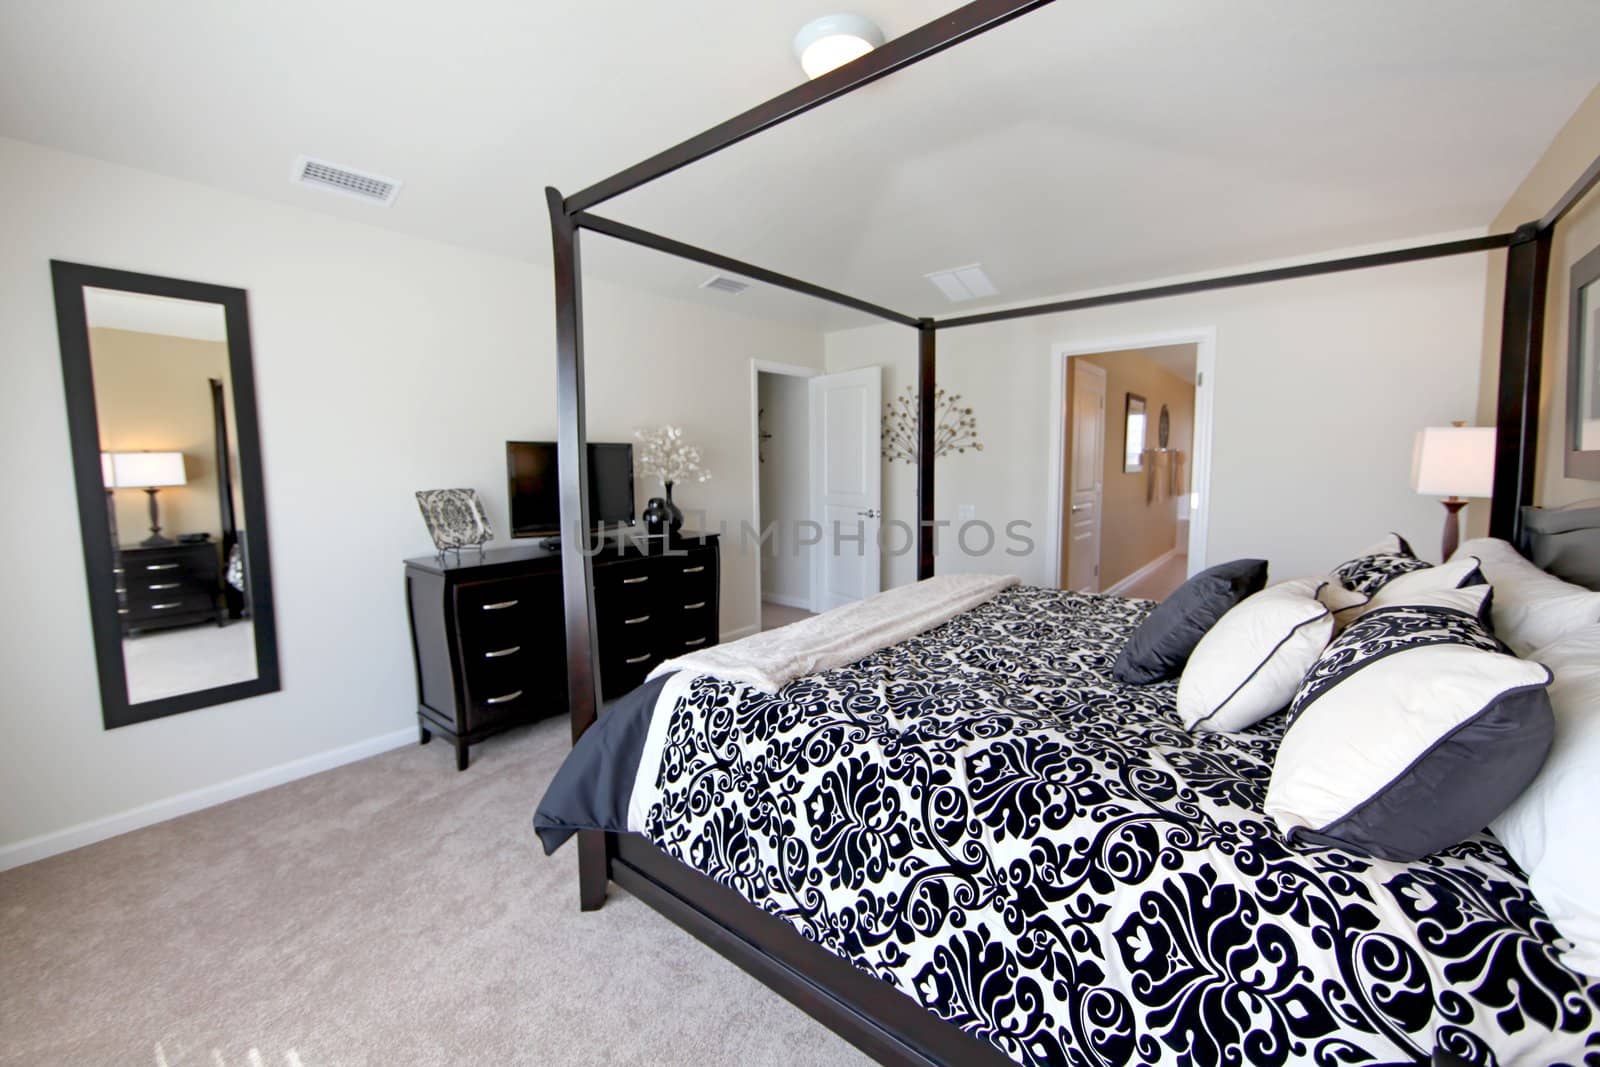 A King Master Bedroom, interior shot of a Home